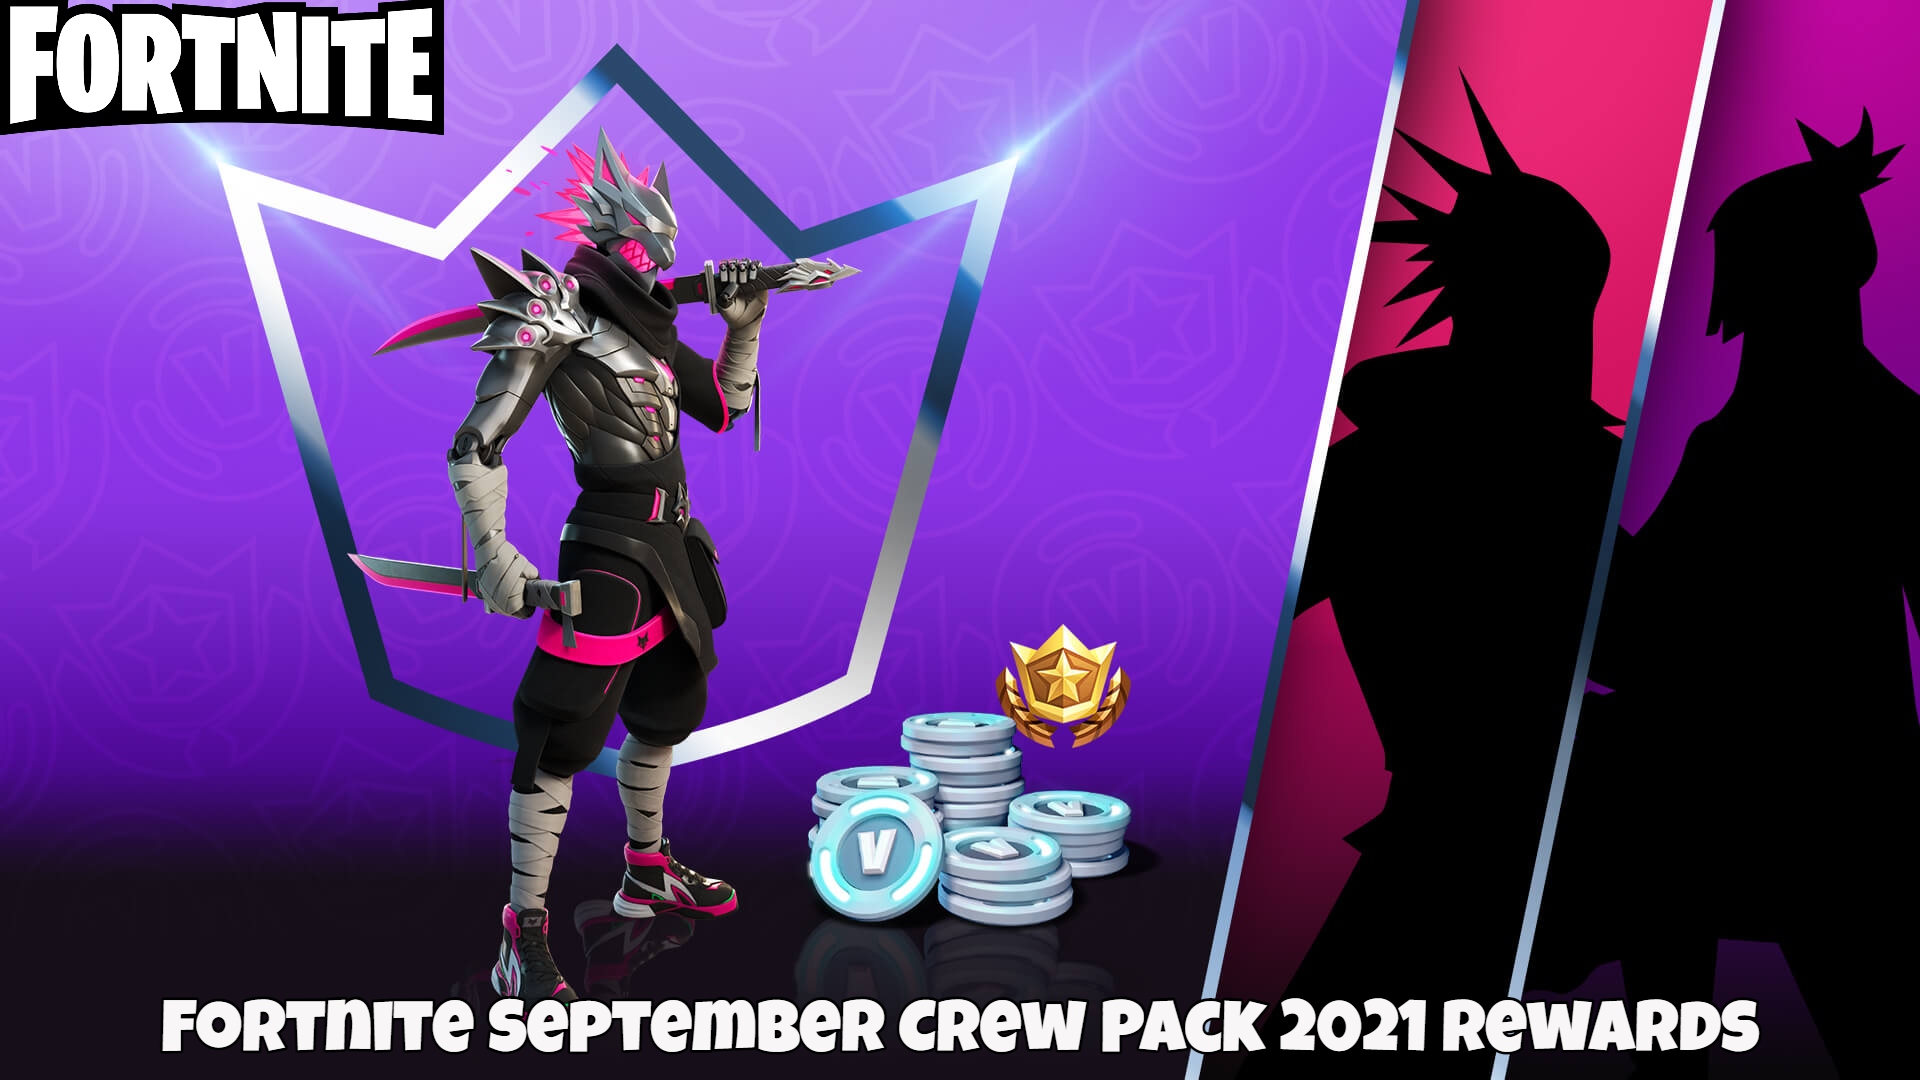 You are currently viewing Fortnite September Crew Pack 2021 Rewards